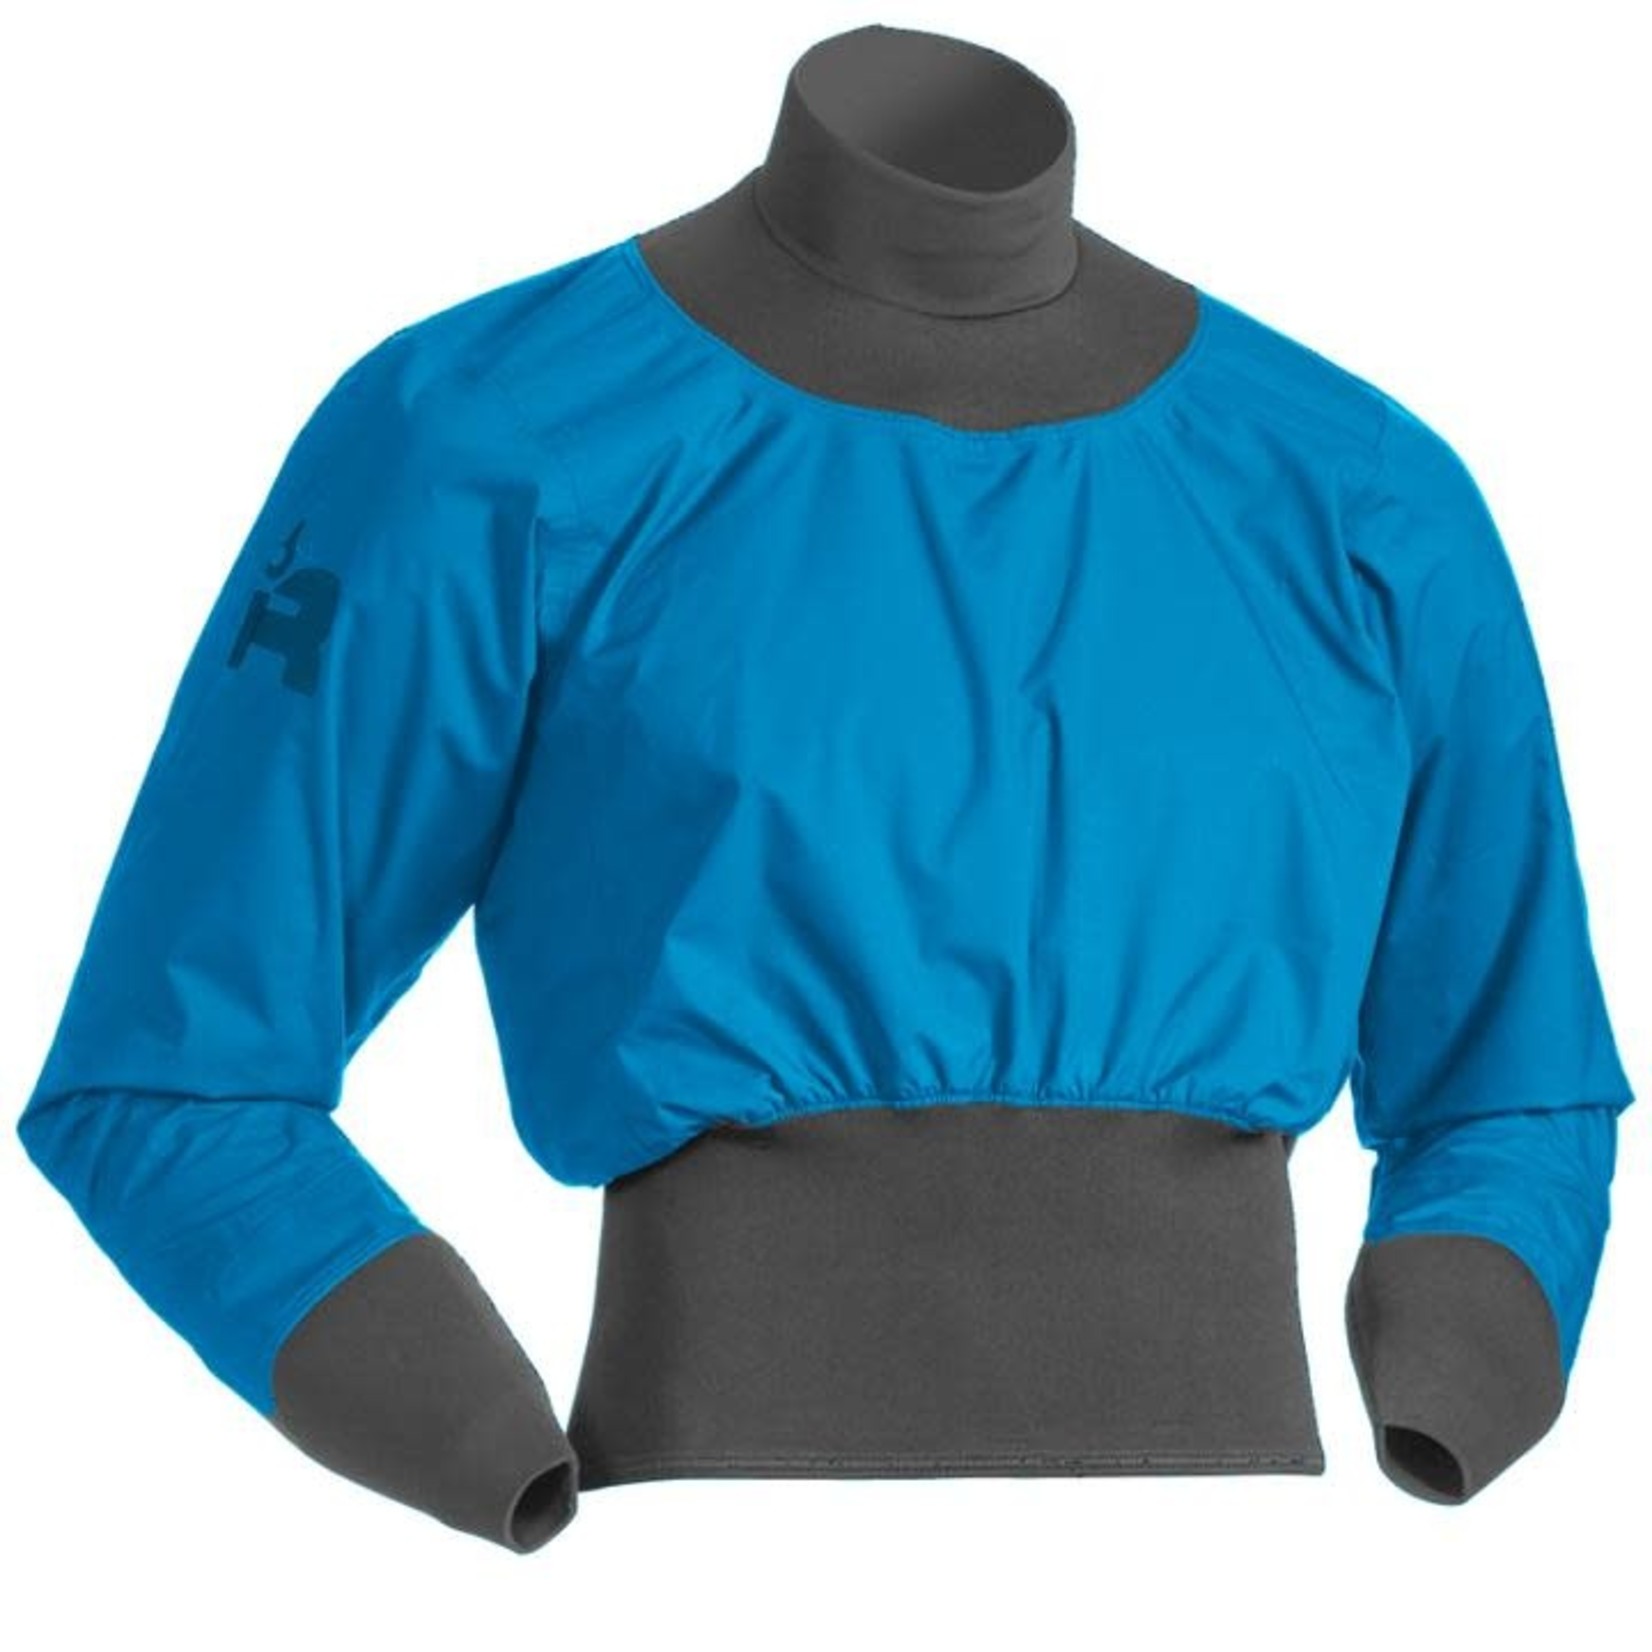 Immersion Research Immersion Research Long Sleeve Nano Jacket - 2022